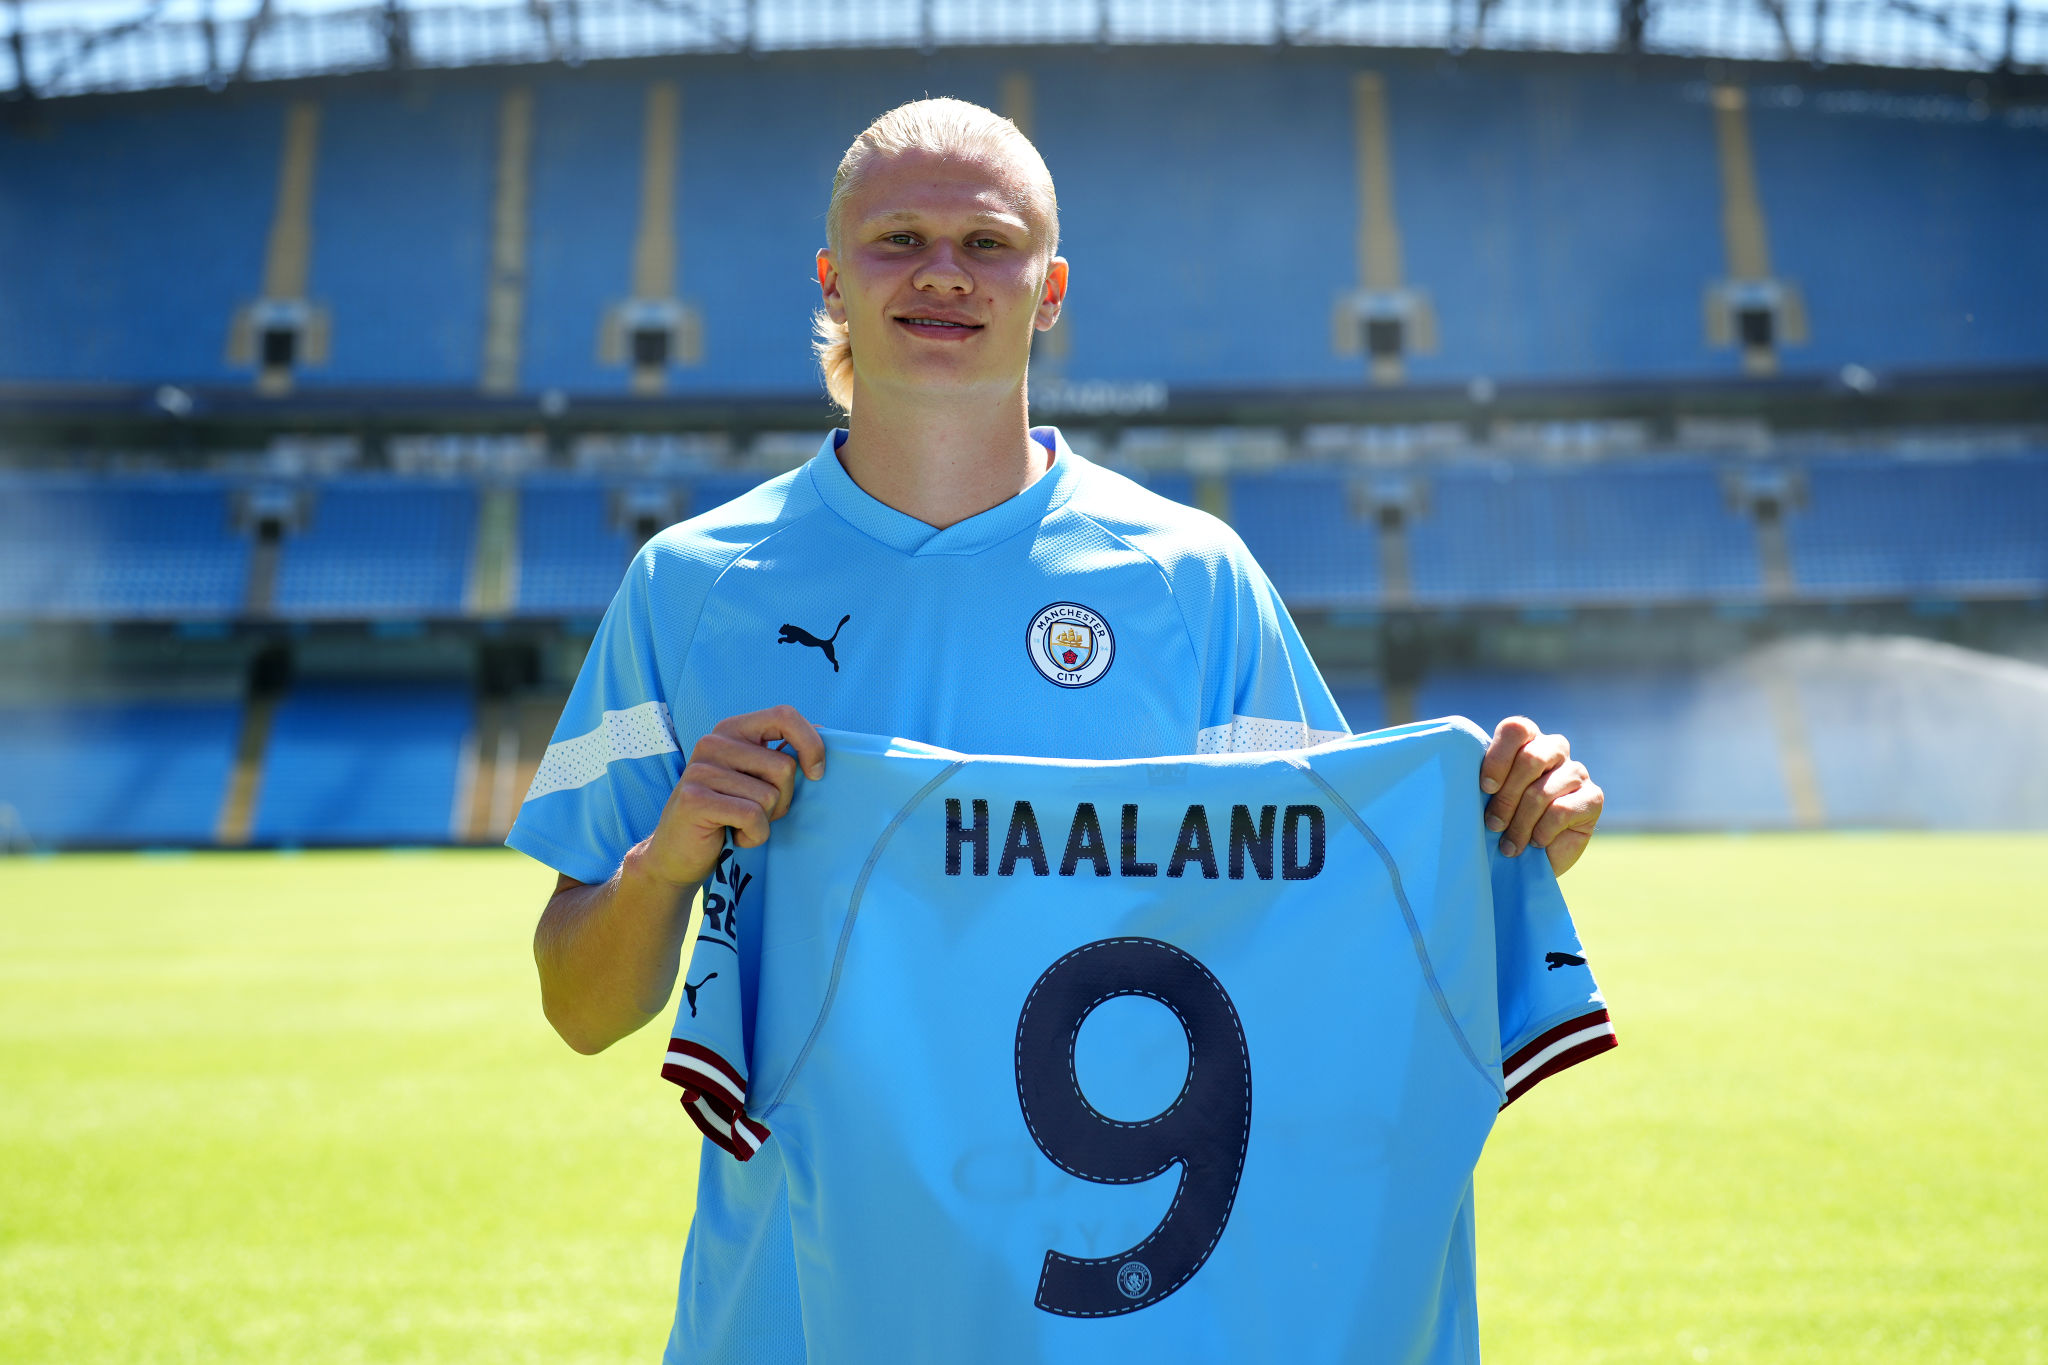 Premier League 2022-23: Erling Haaland and Co. eager to break Man City's Champions League curse, Check out Manchester City 2022-23 season preview, fixtures, transfers, key players and more